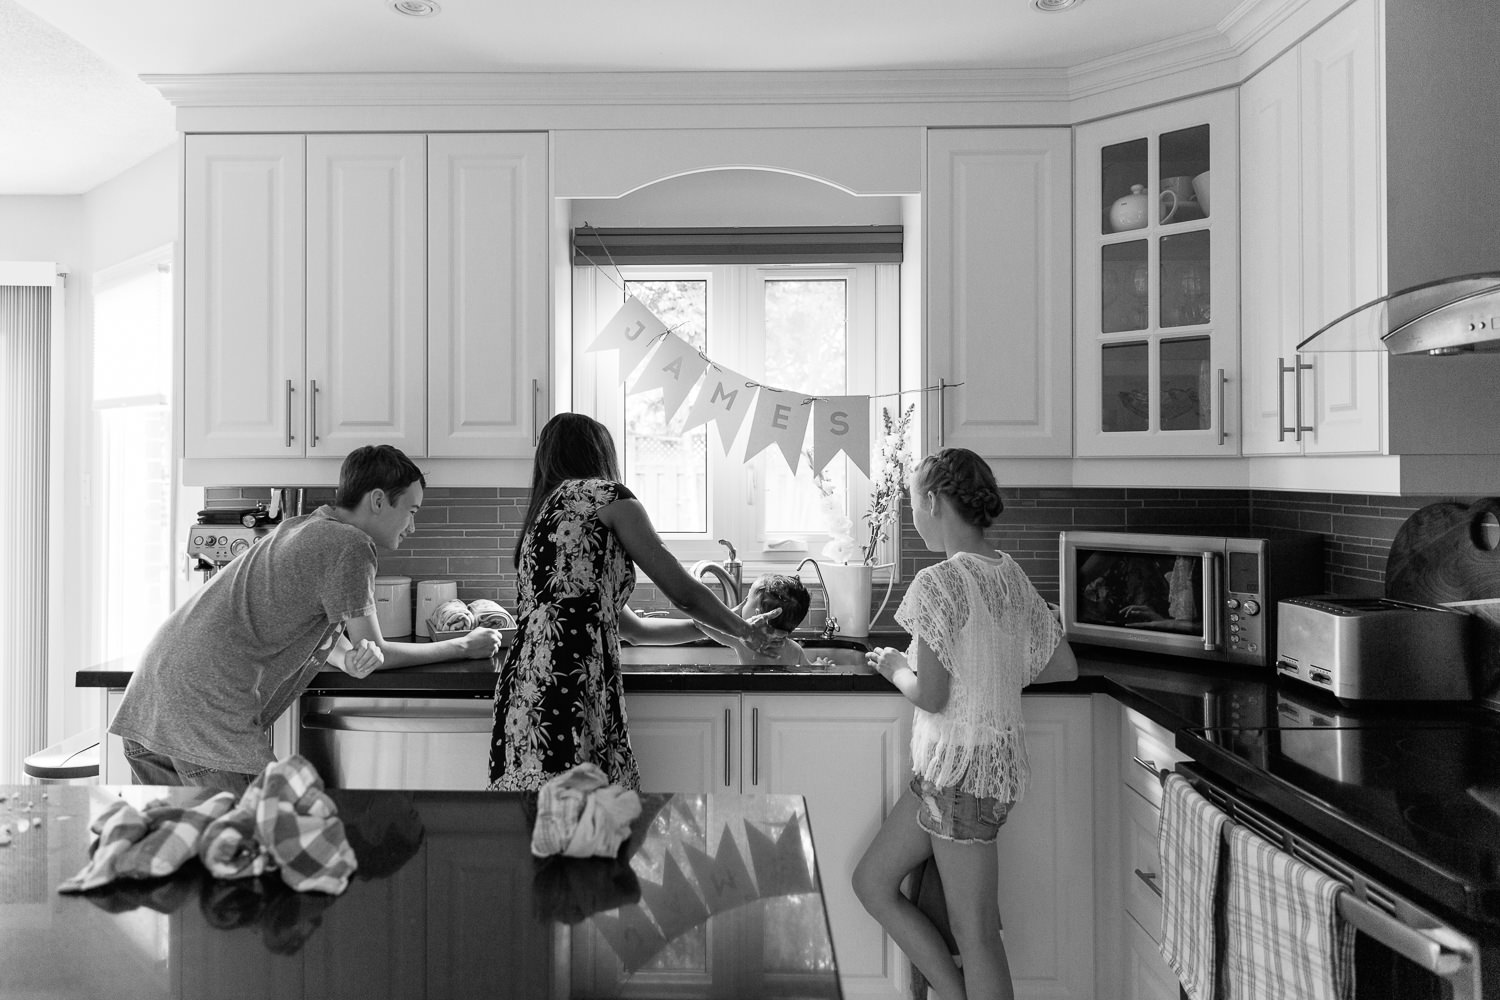 mom, 11 year old girl and 13 year old boy standing at kitchen sink giving 1 year old baby brother a bath - Newmarket Lifestyle Photos